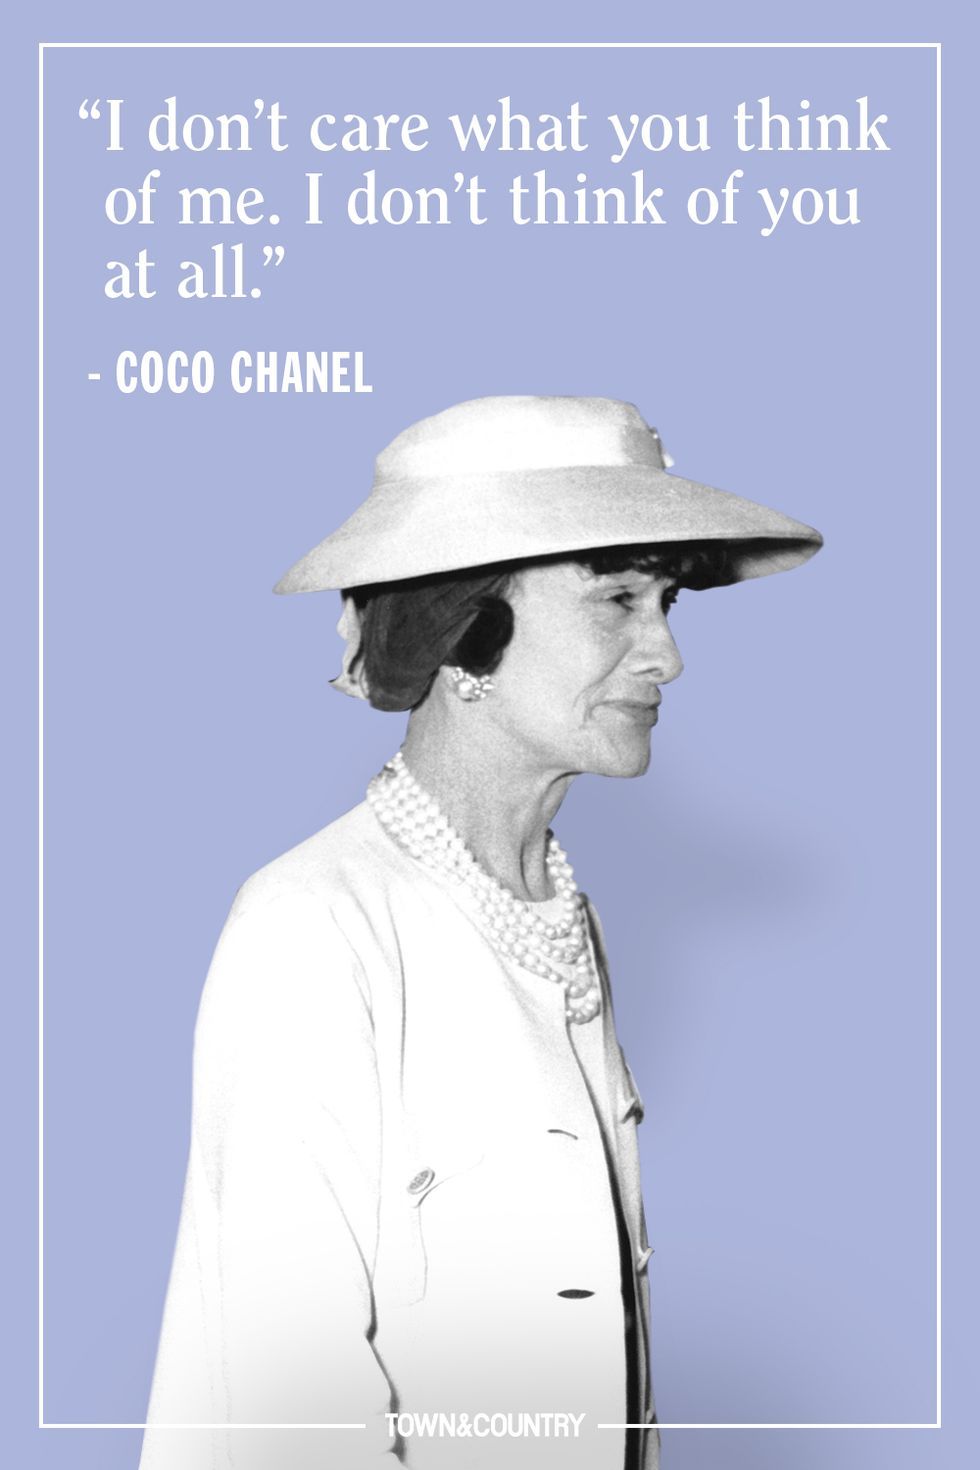 Coco Chanel iconic quotes on Style✨ wisdom from a fashion icon💖 Part